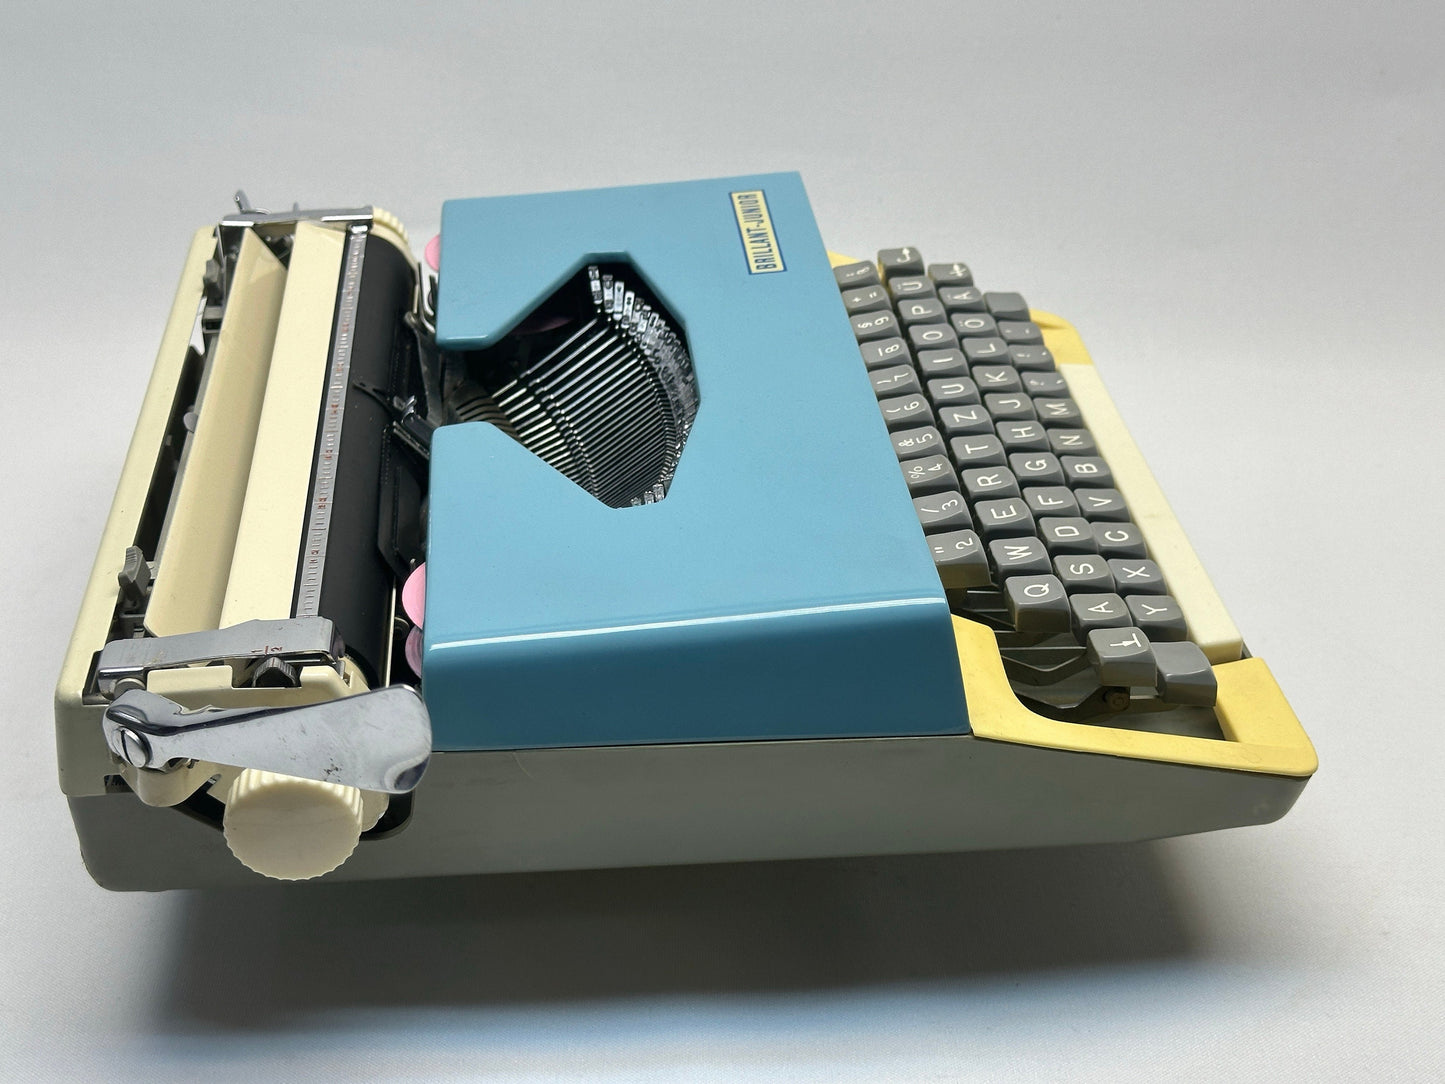 Brilliant Typewriter with Blue Cover, Yellow Accents, Pink Typewriter Ribbon, Leather Case - Antique Typewriter, Fully Functional